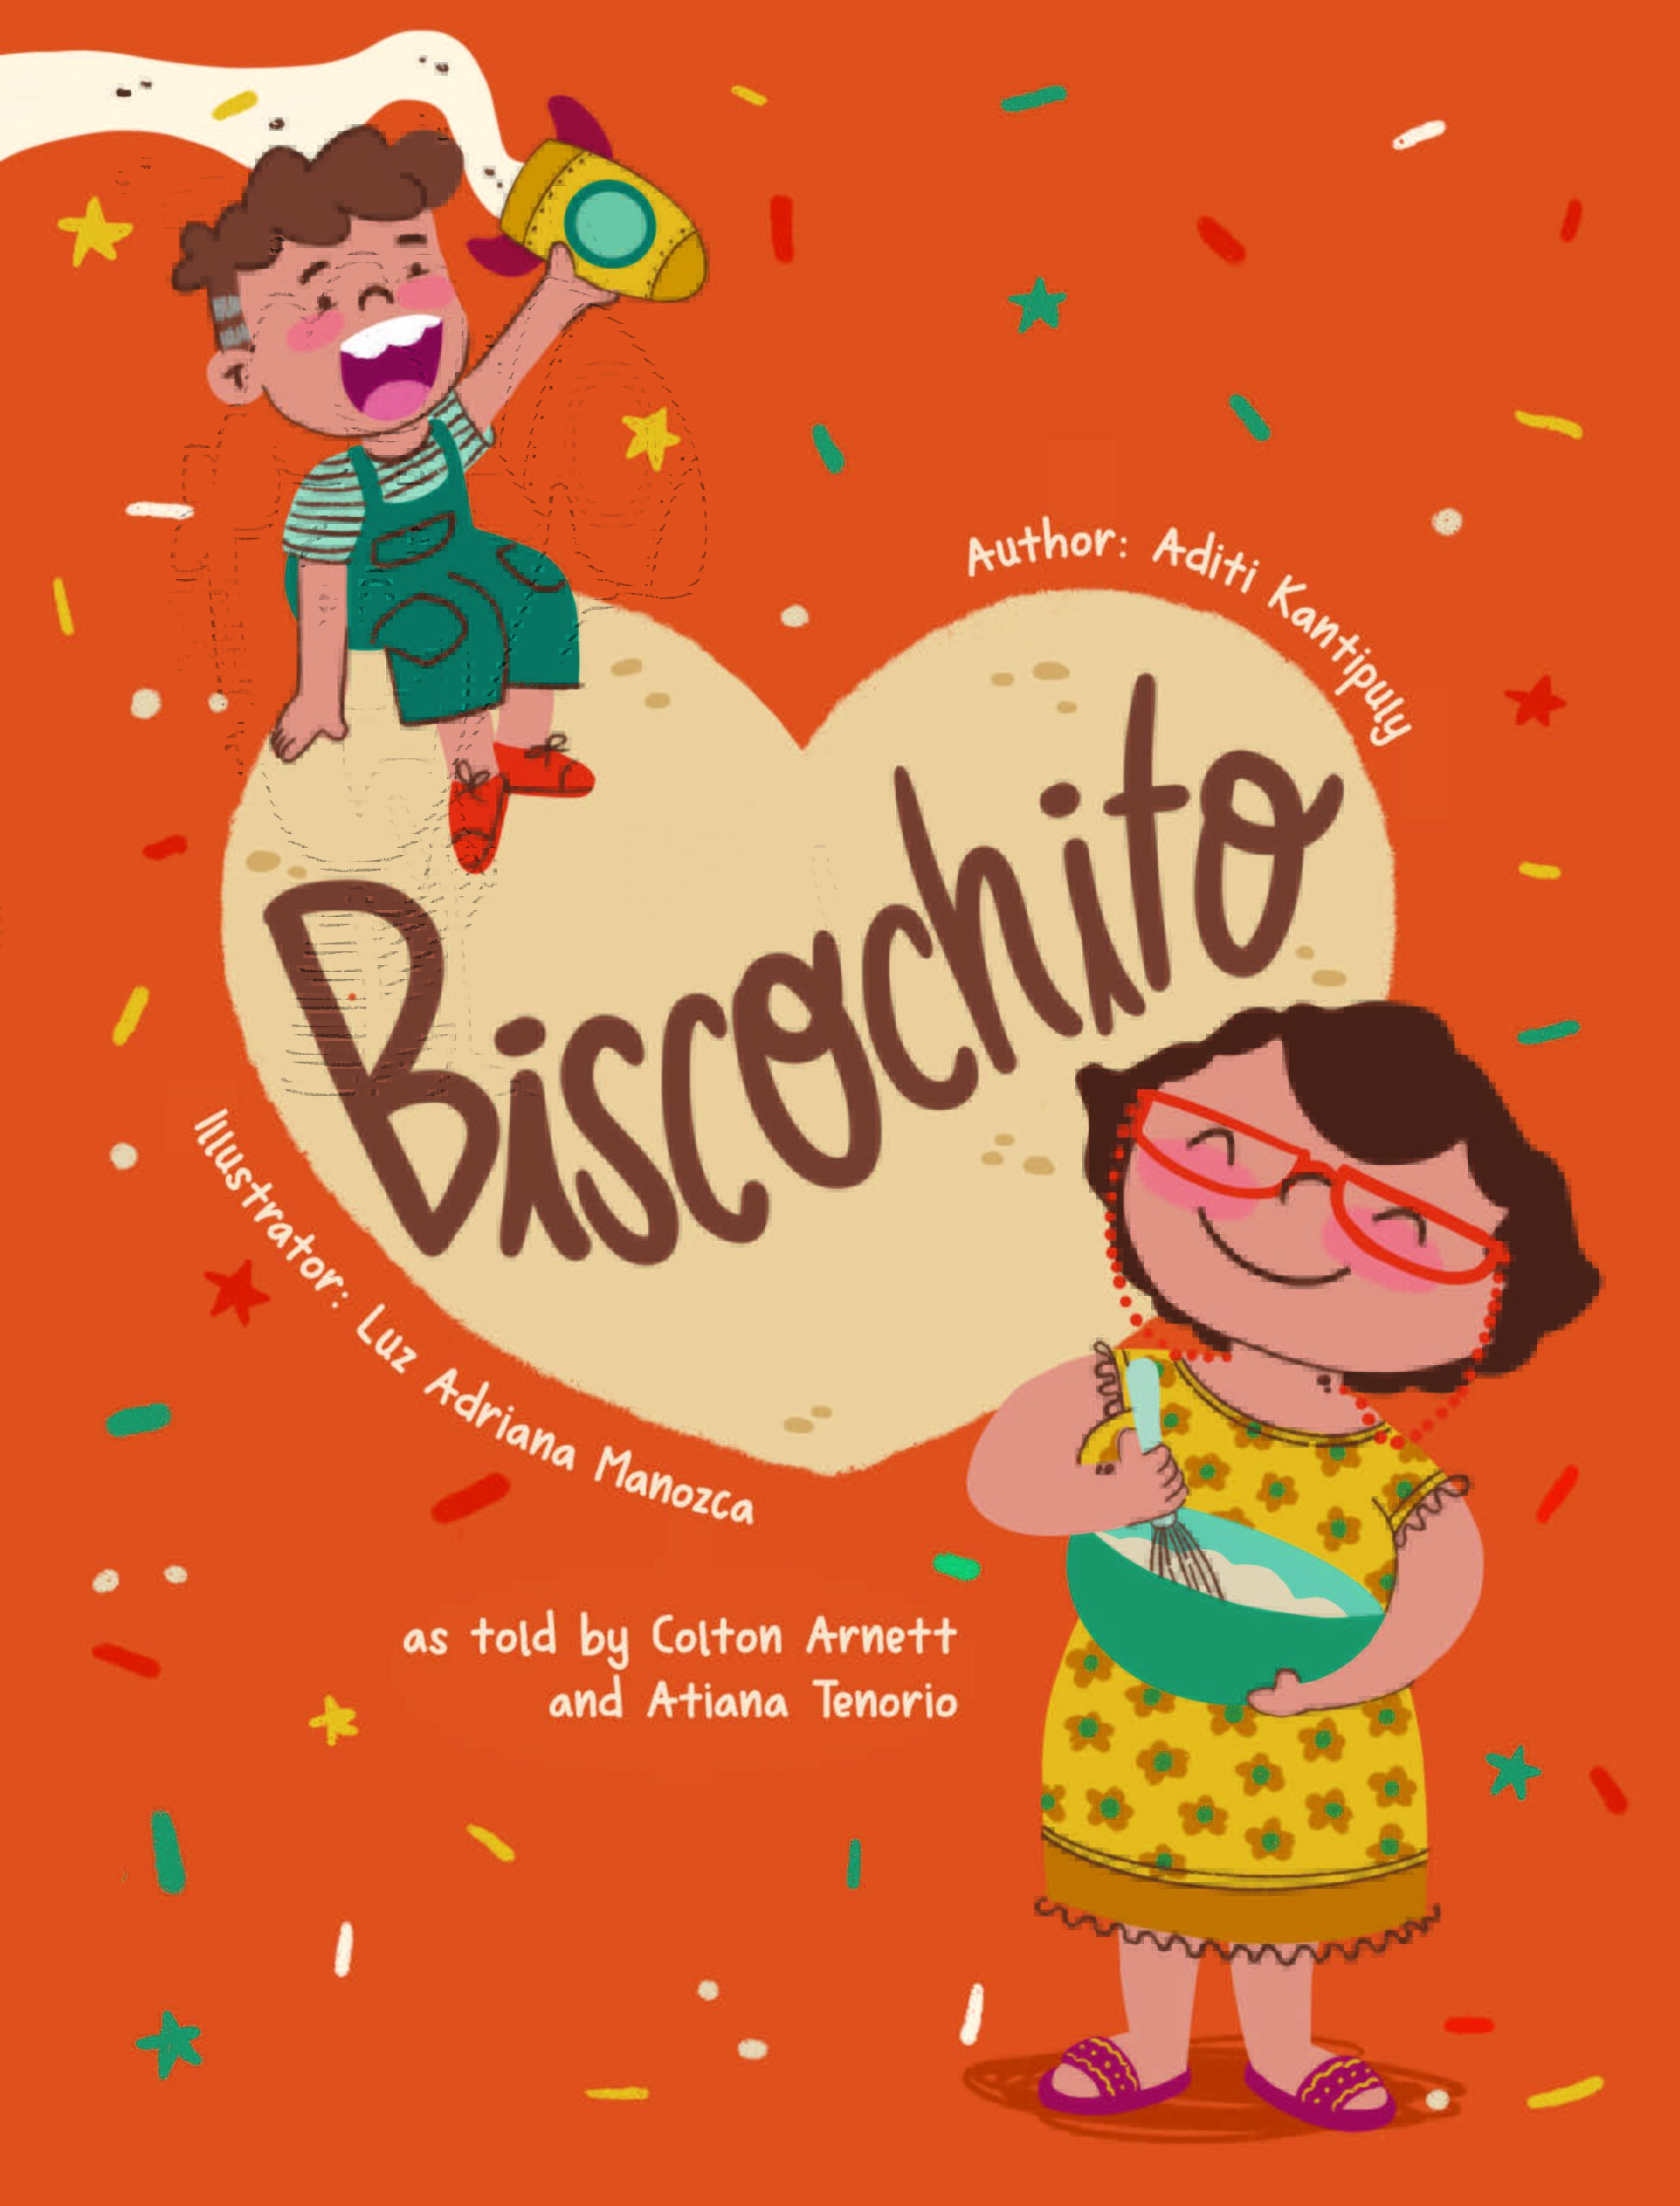 Get Your Copy of Biscochito